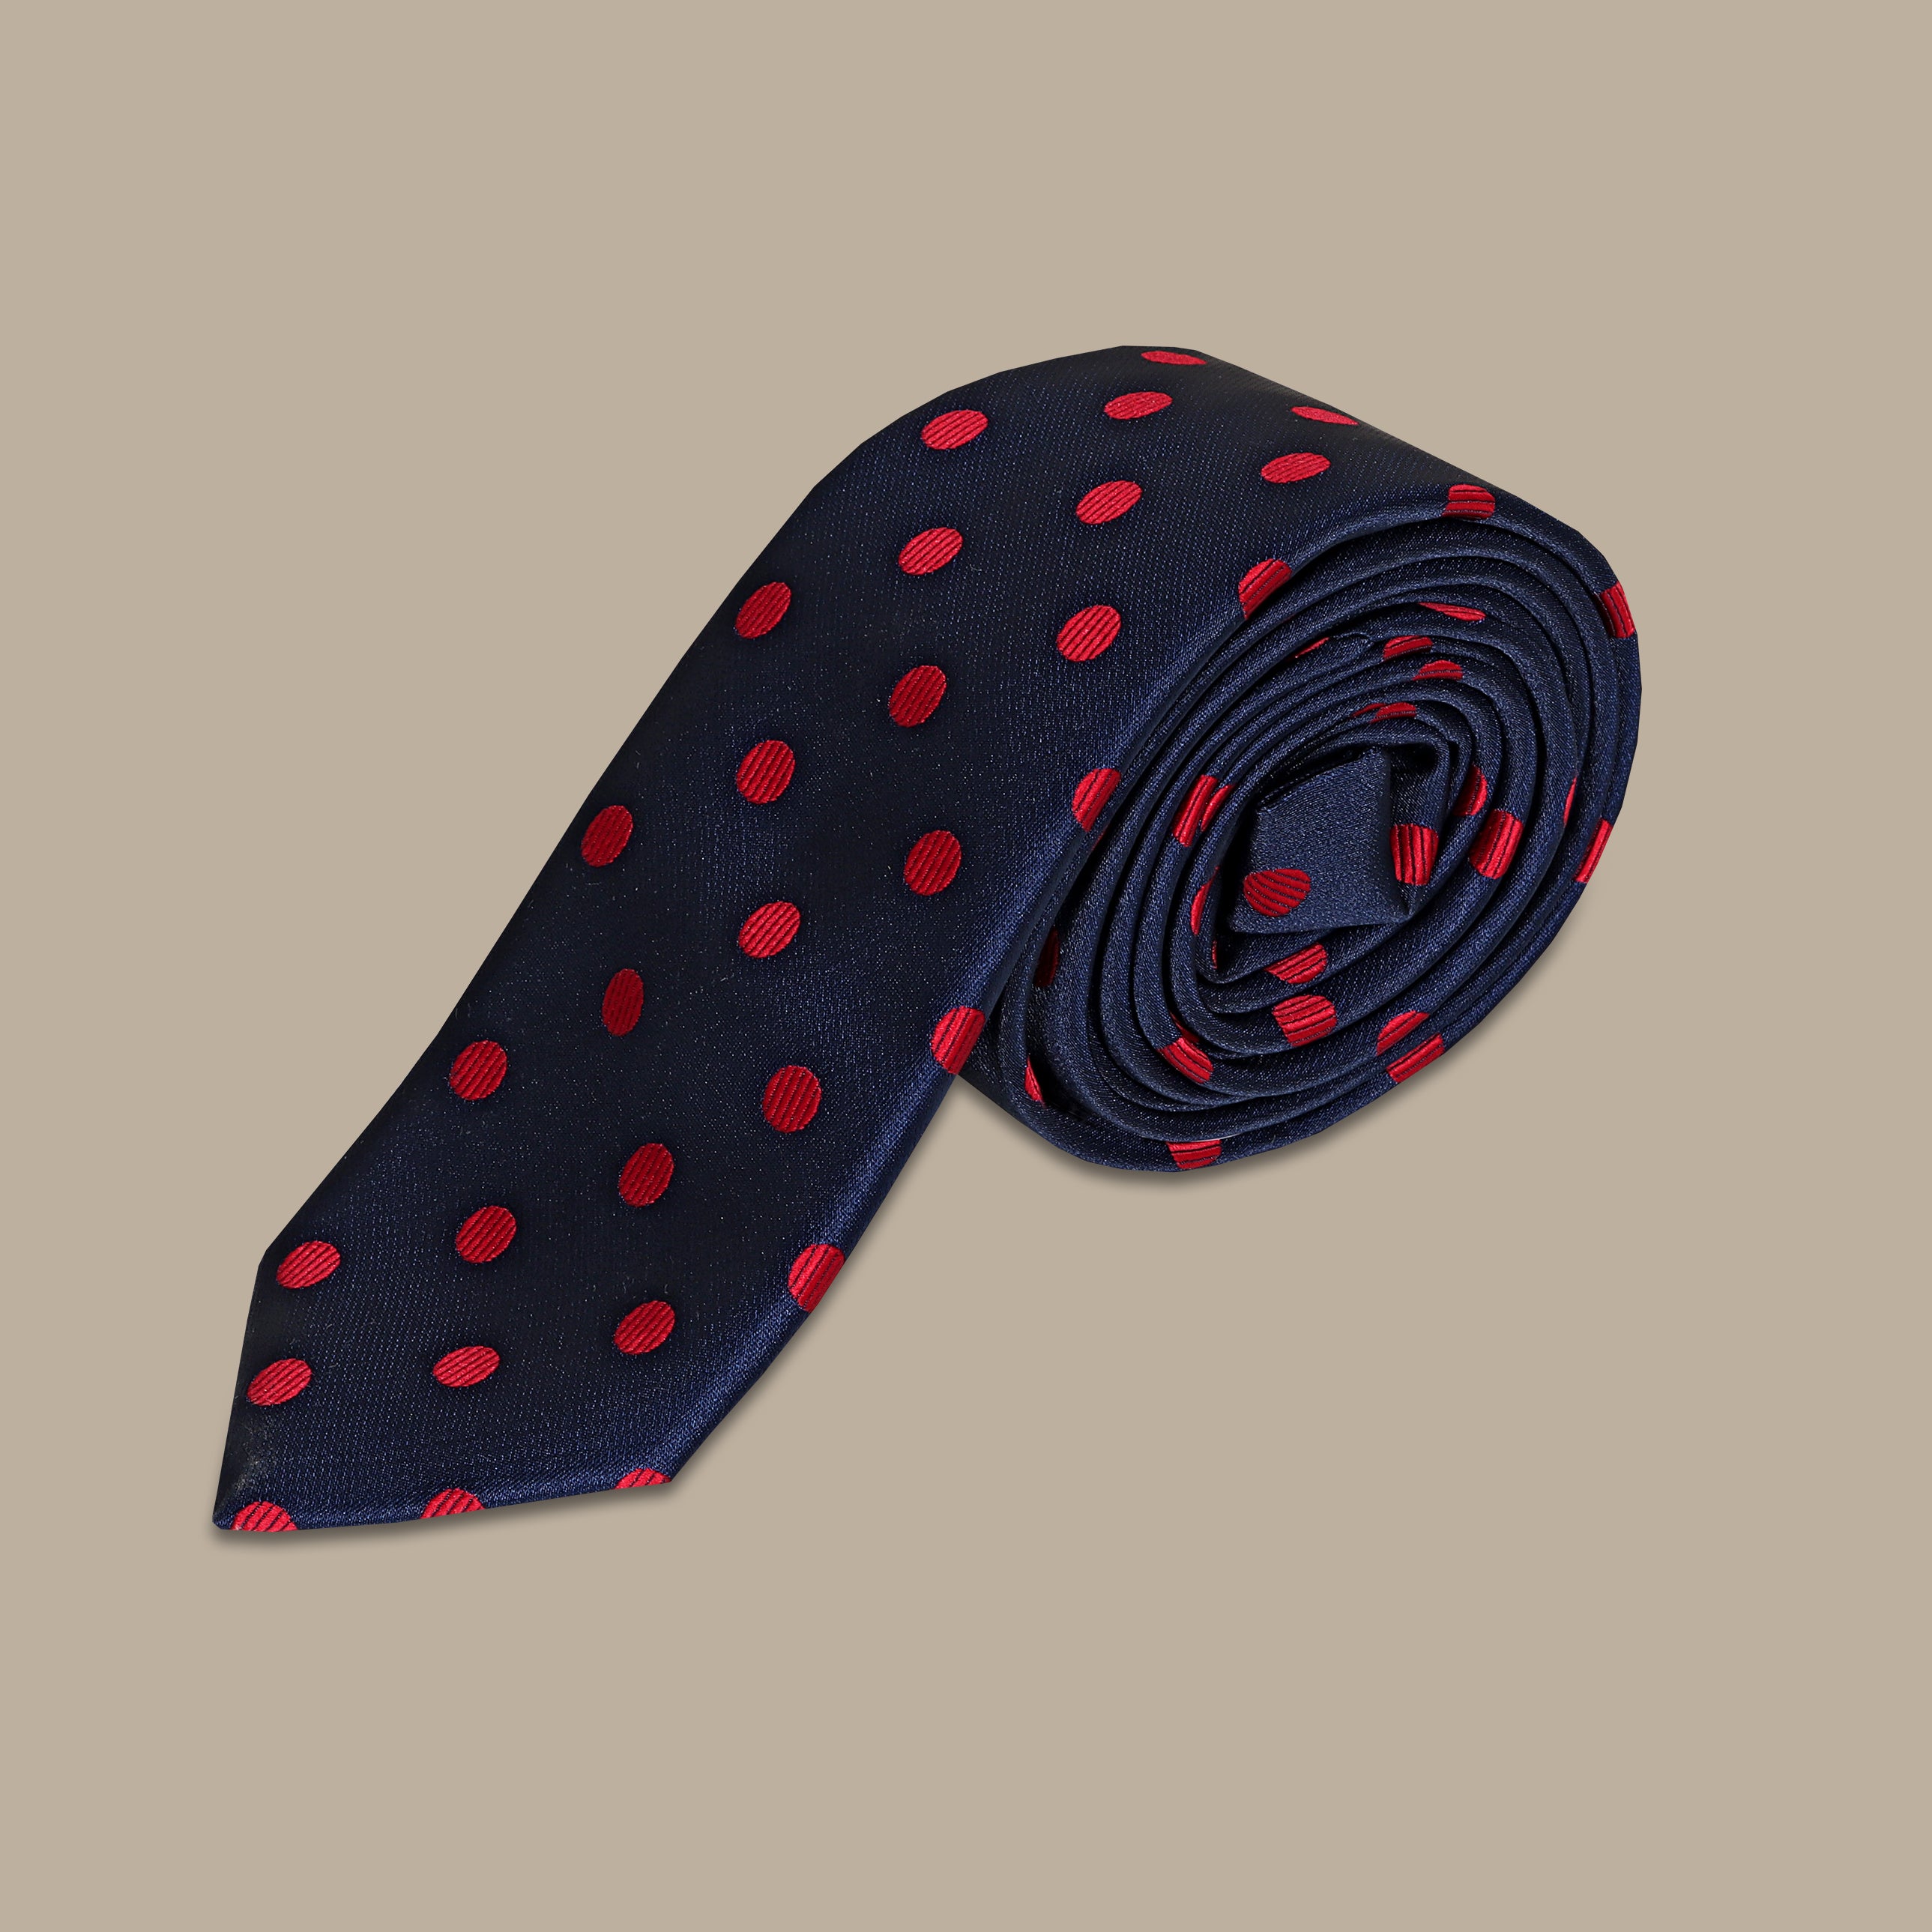 Classic Contrast: Navy Blue/Red Dotted Tie Set